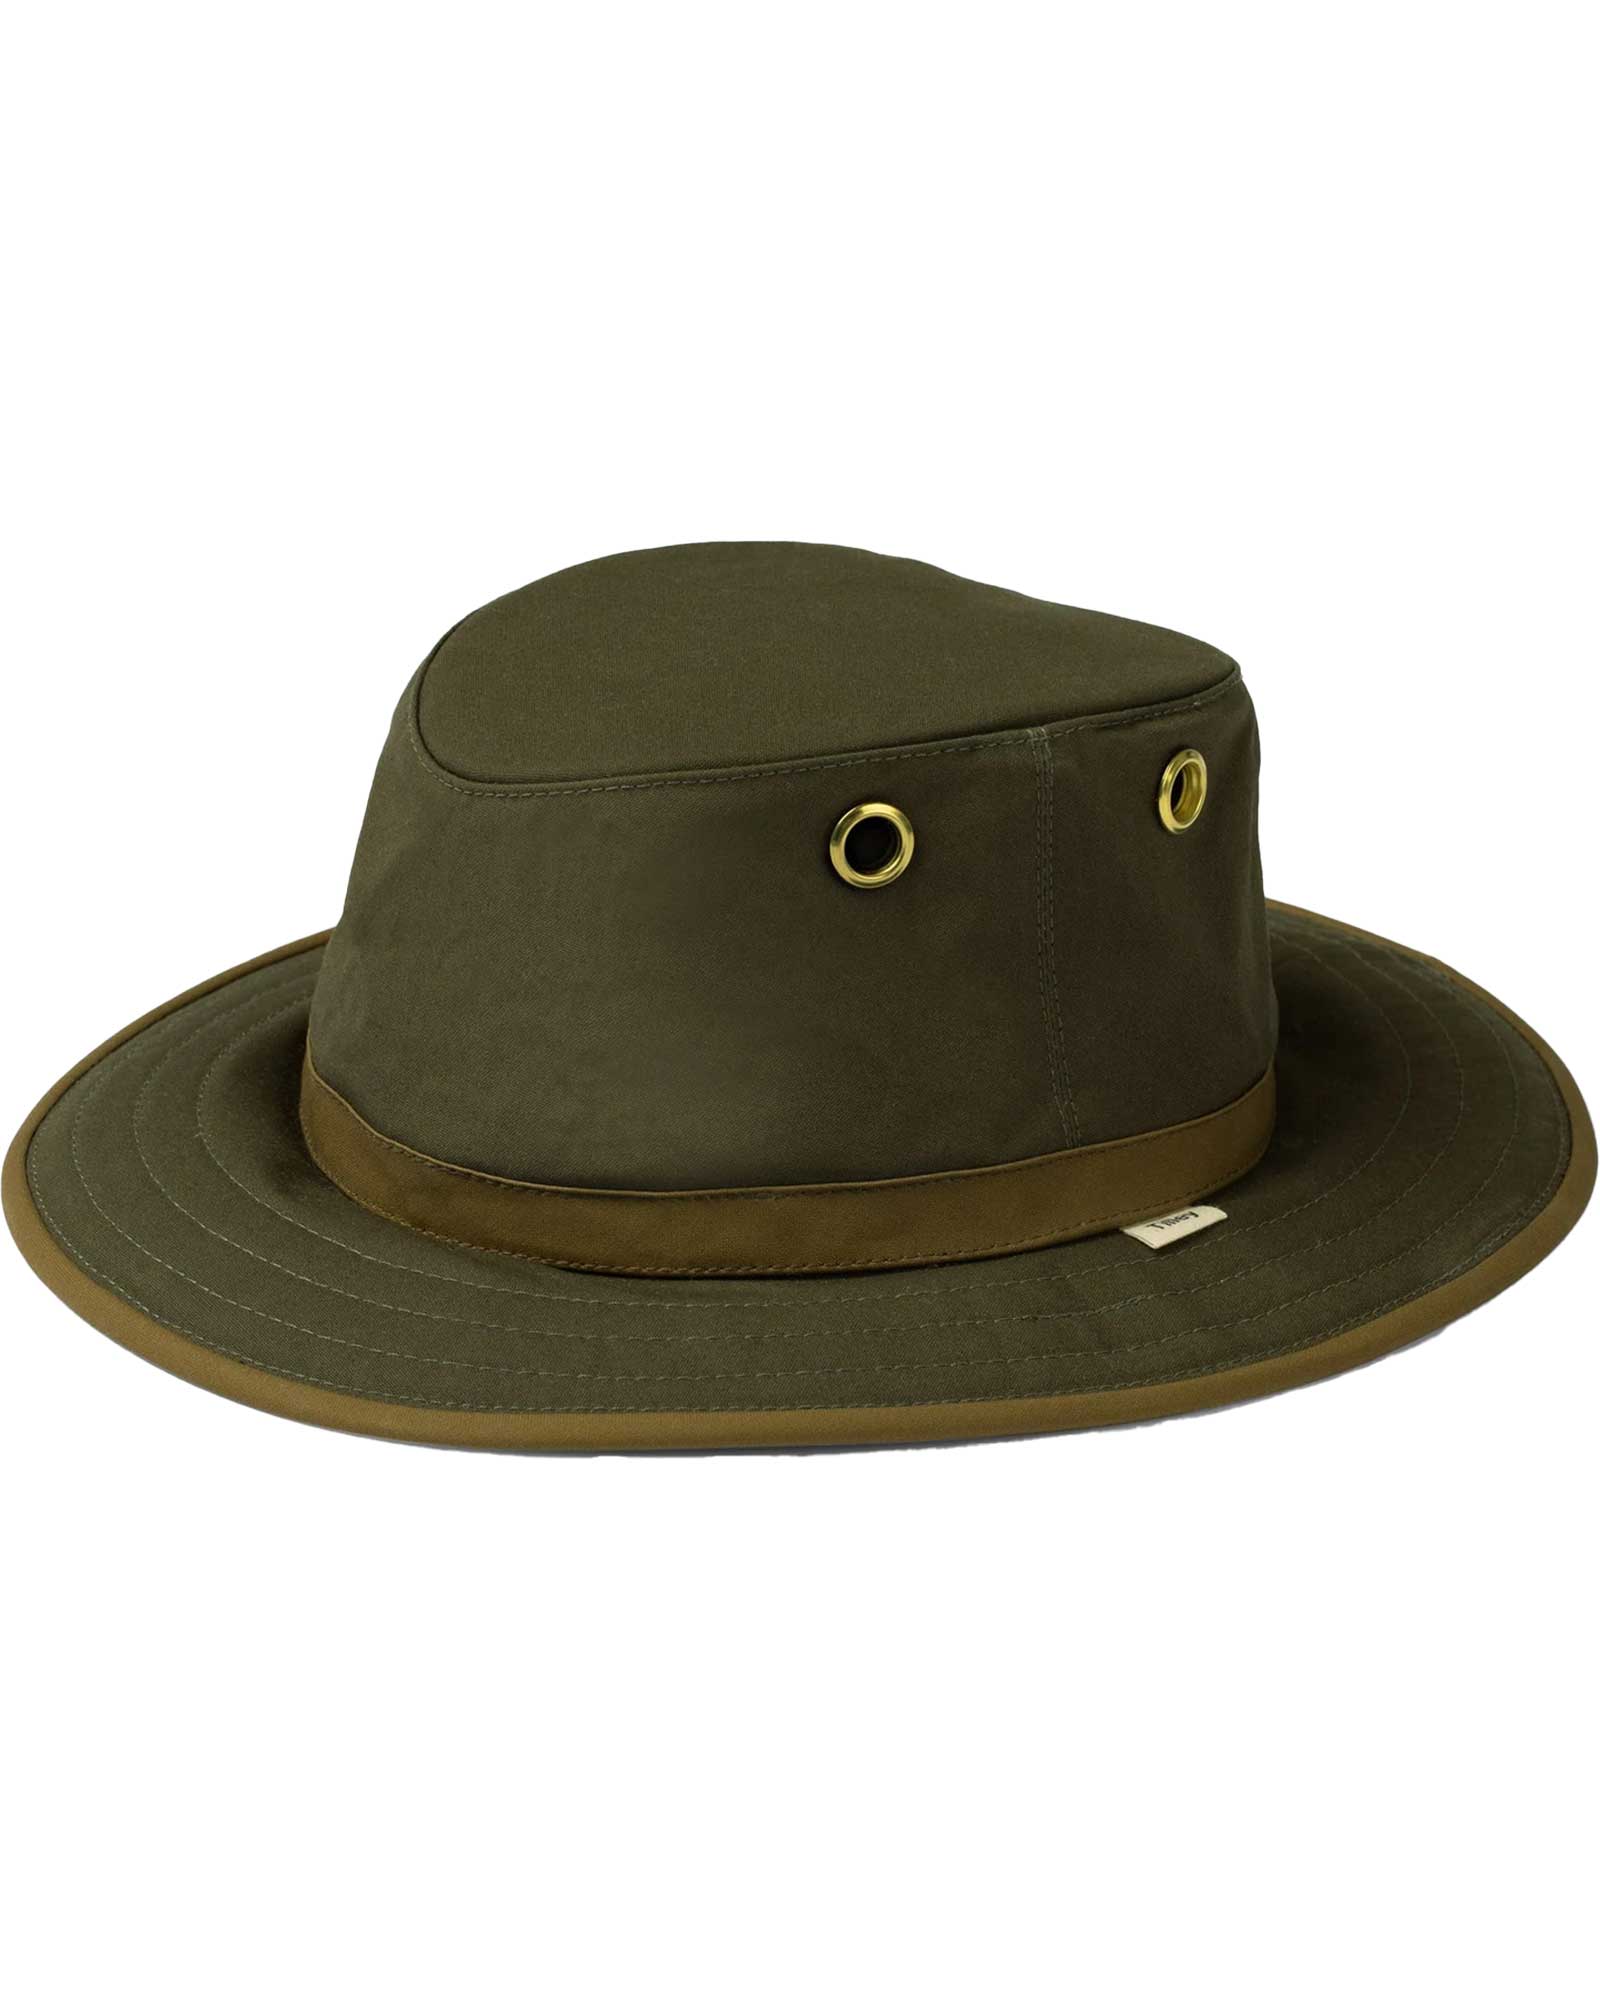 Tilley Outback Waxed Cotton Hat - Green 7